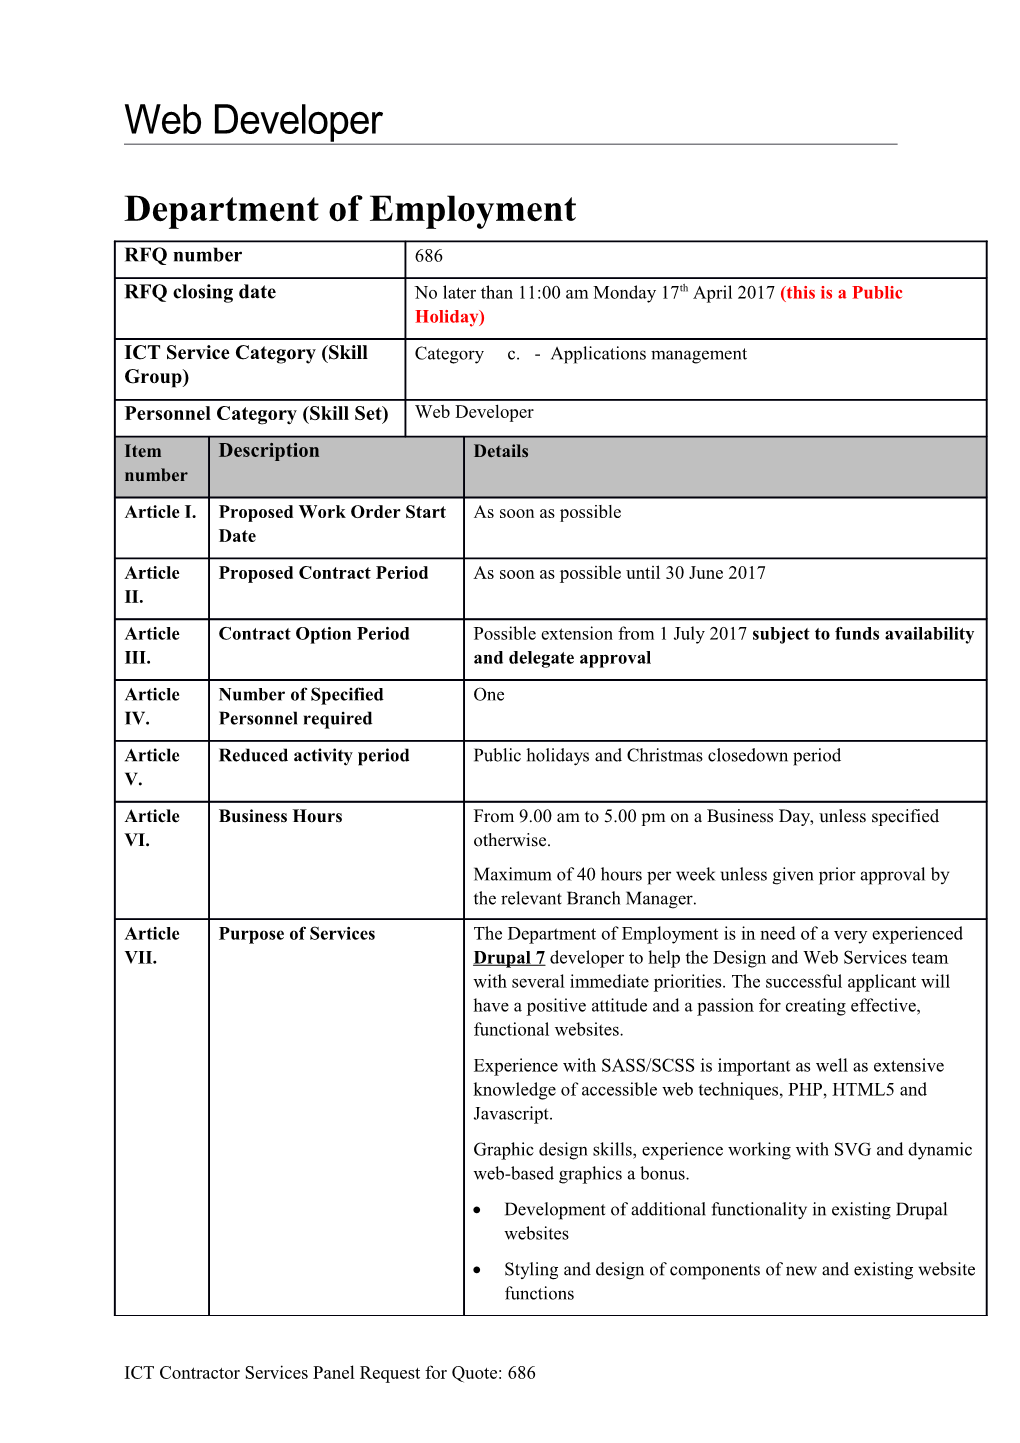 RFQ Template - Department of Employment V1